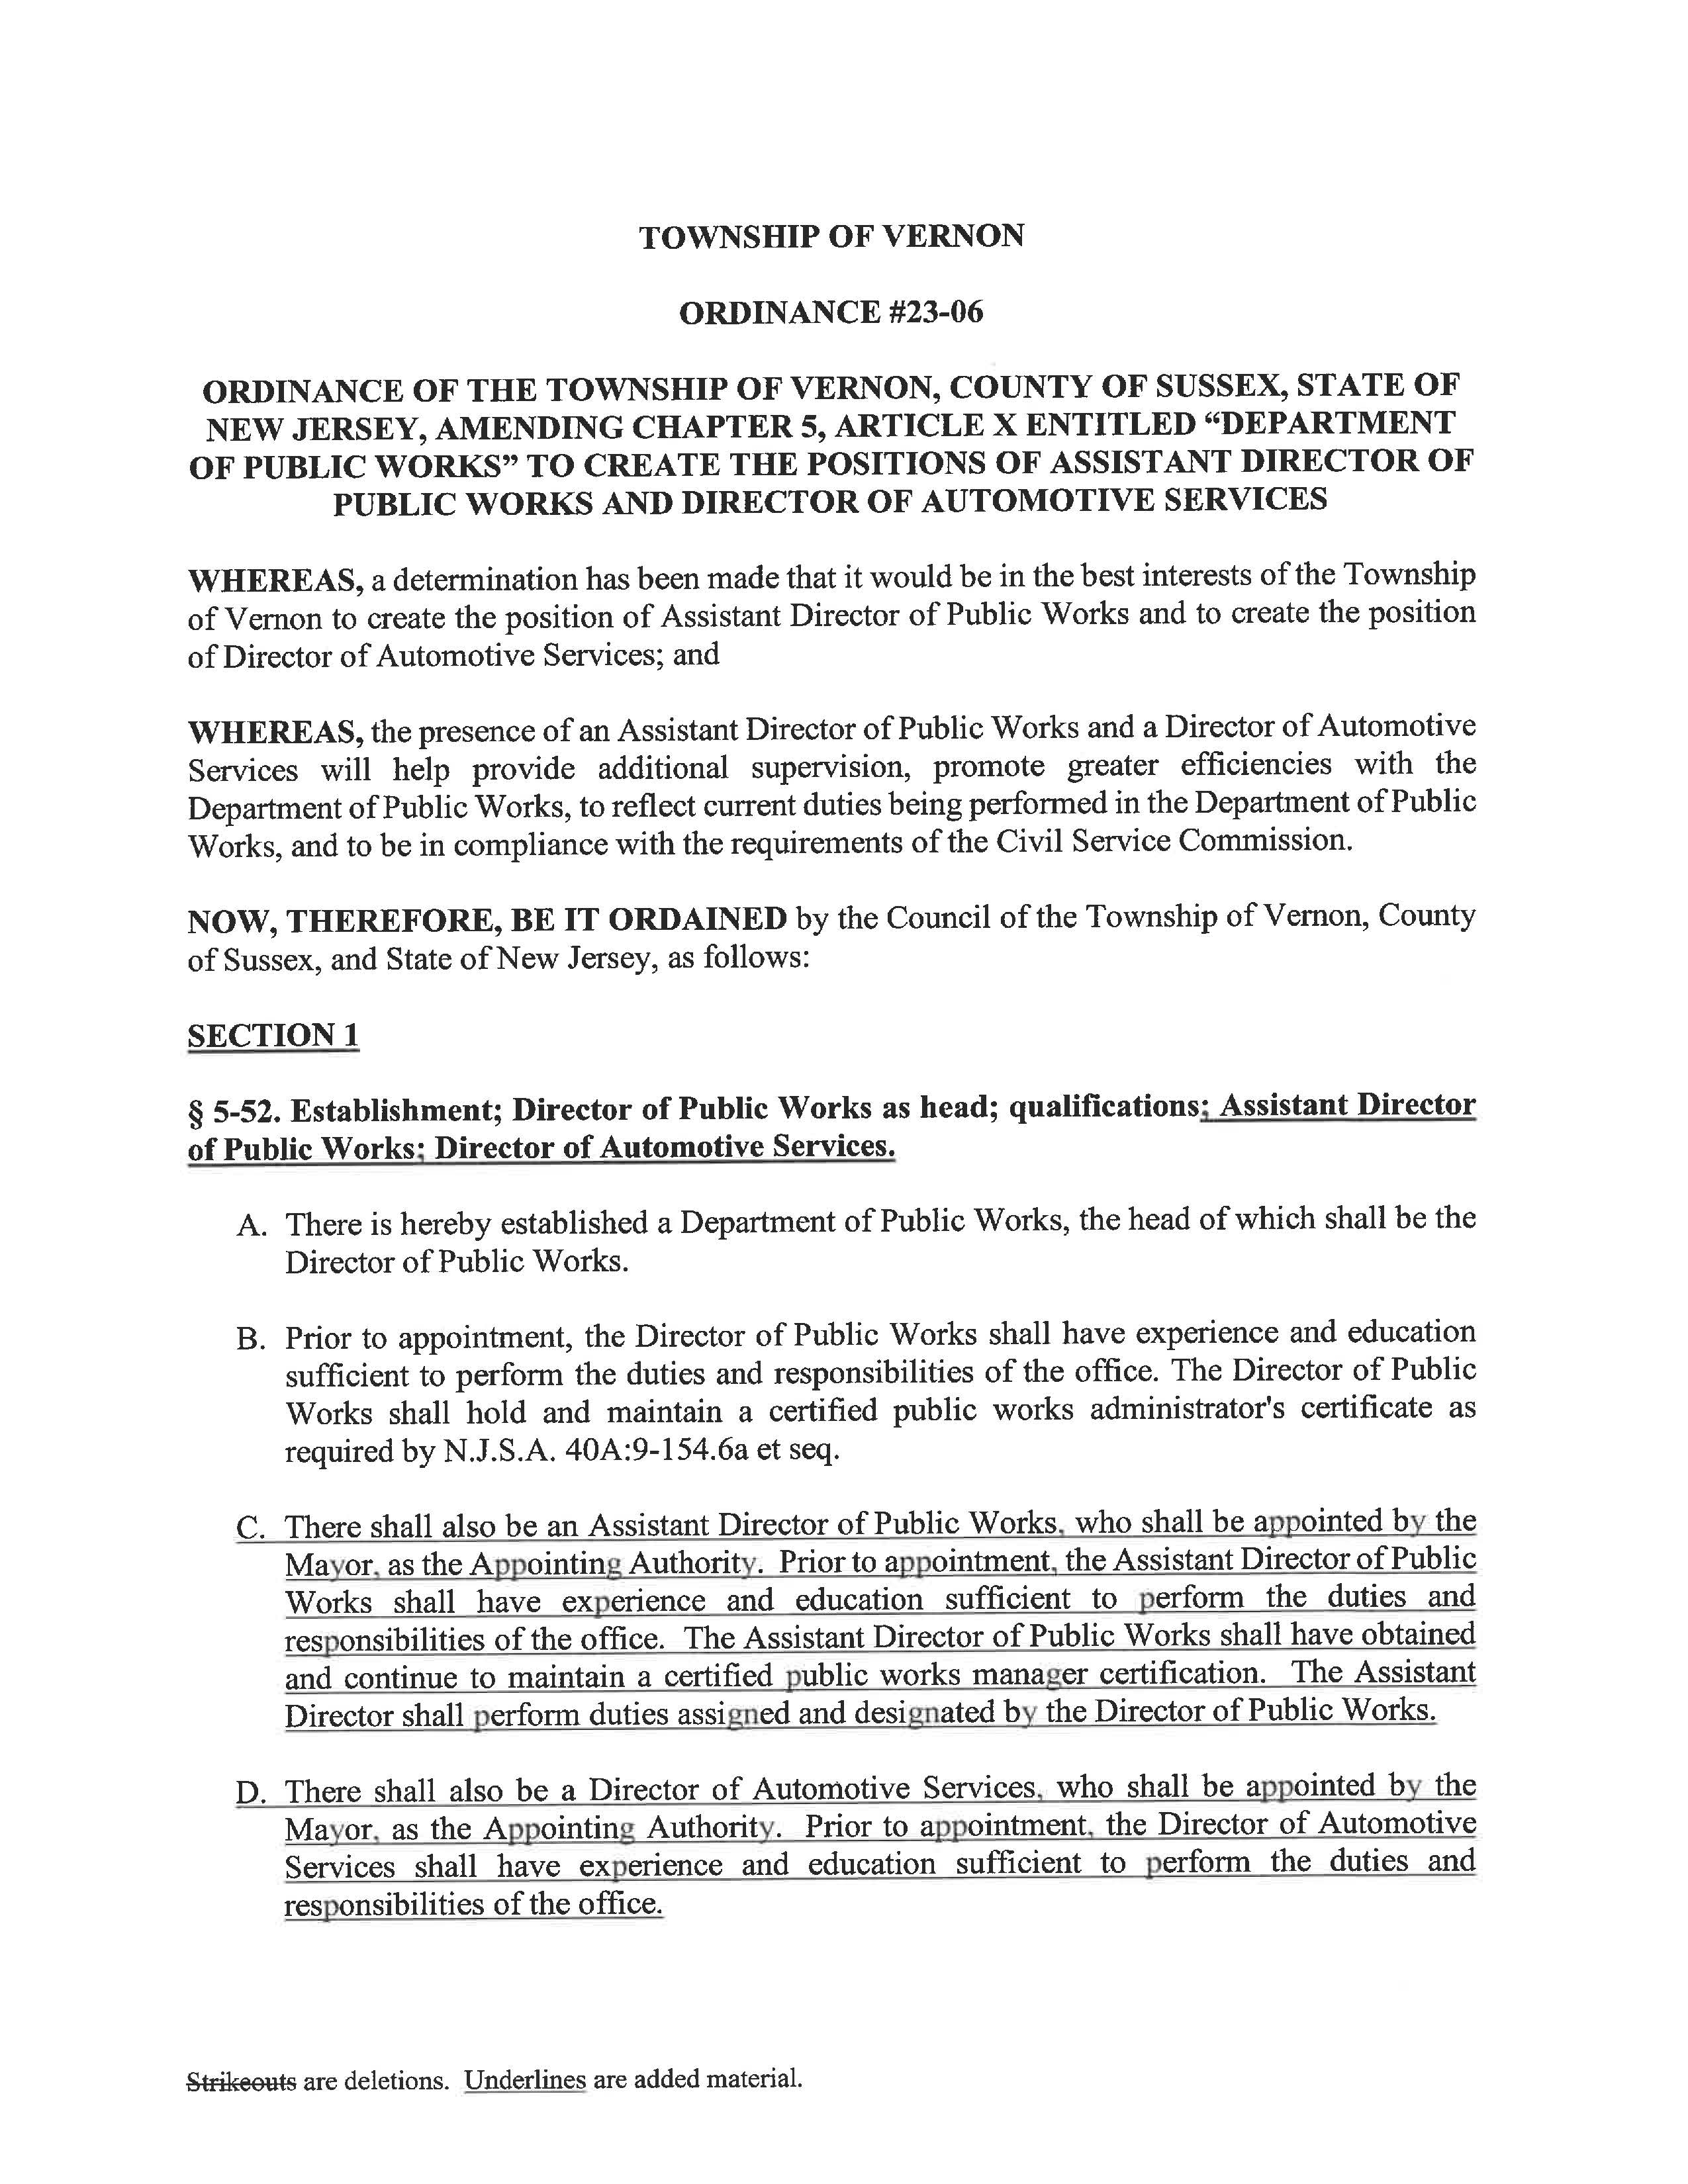 23 06 Ordinance re Assistant Director of Public Works and Director of Automotive Page 1